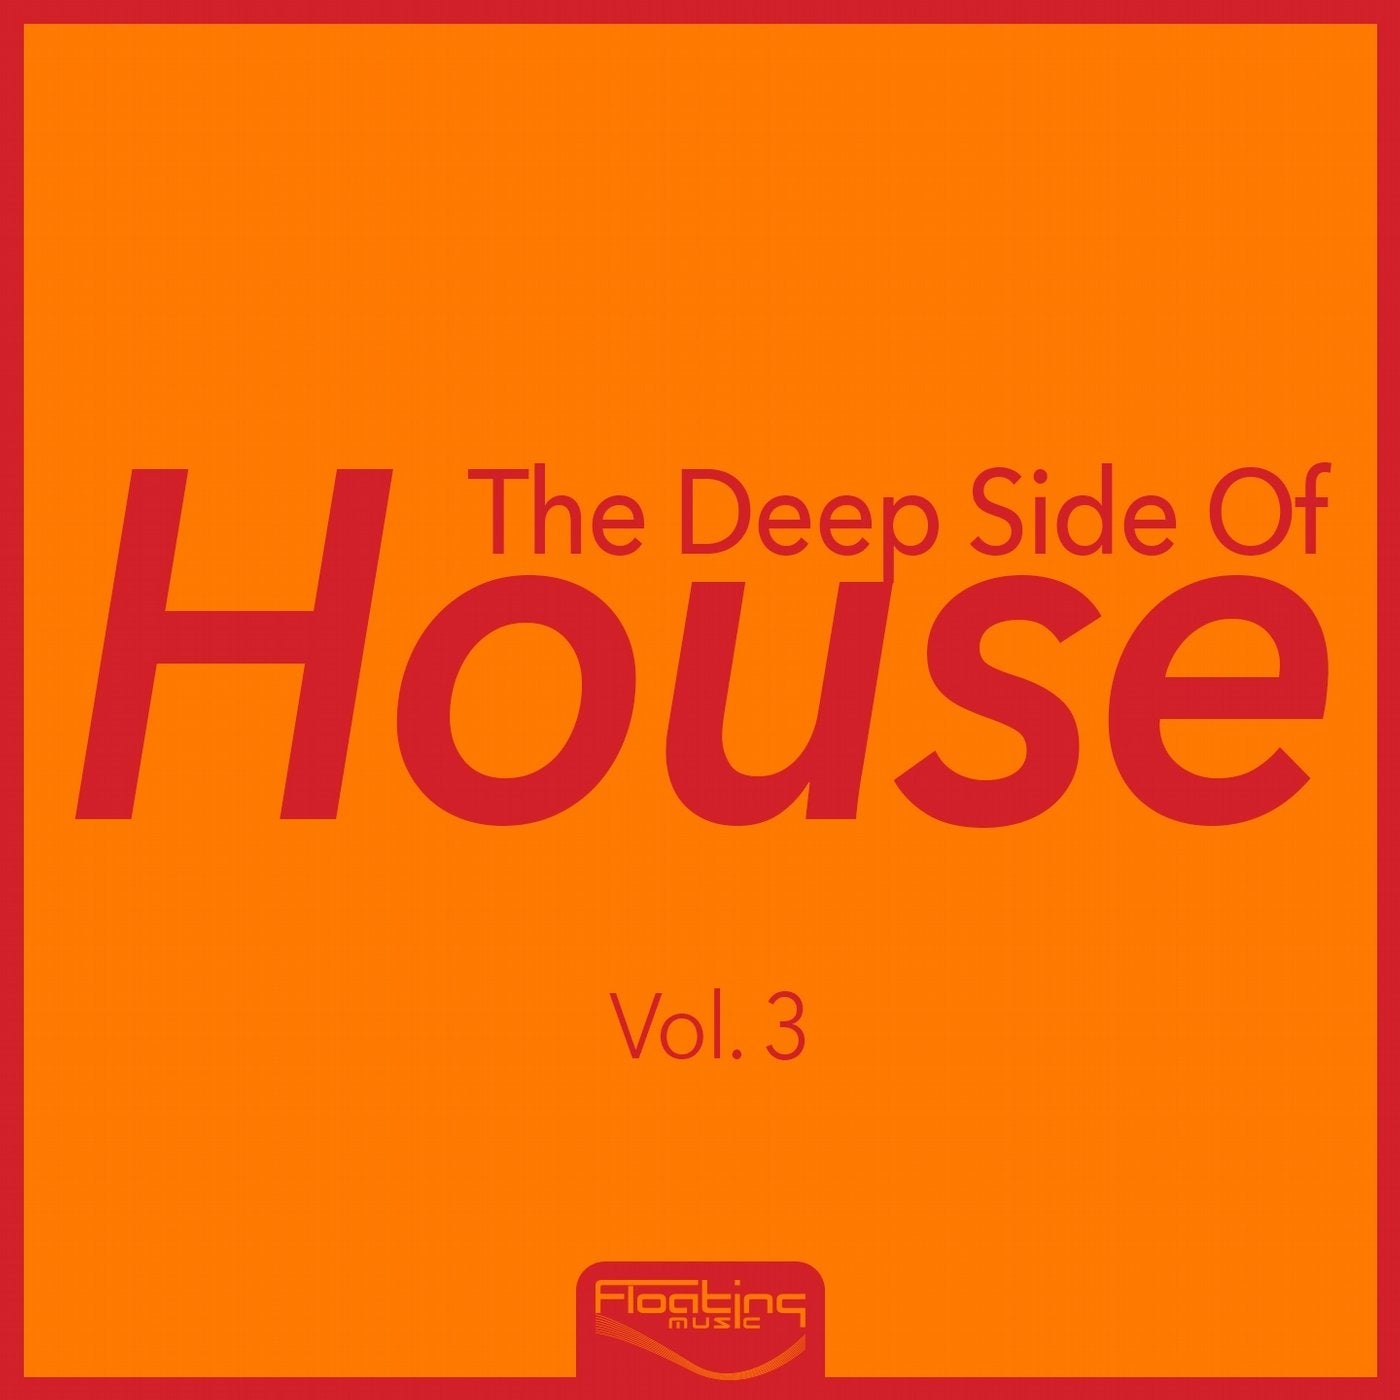 The Deep Side of House, Vol. 3